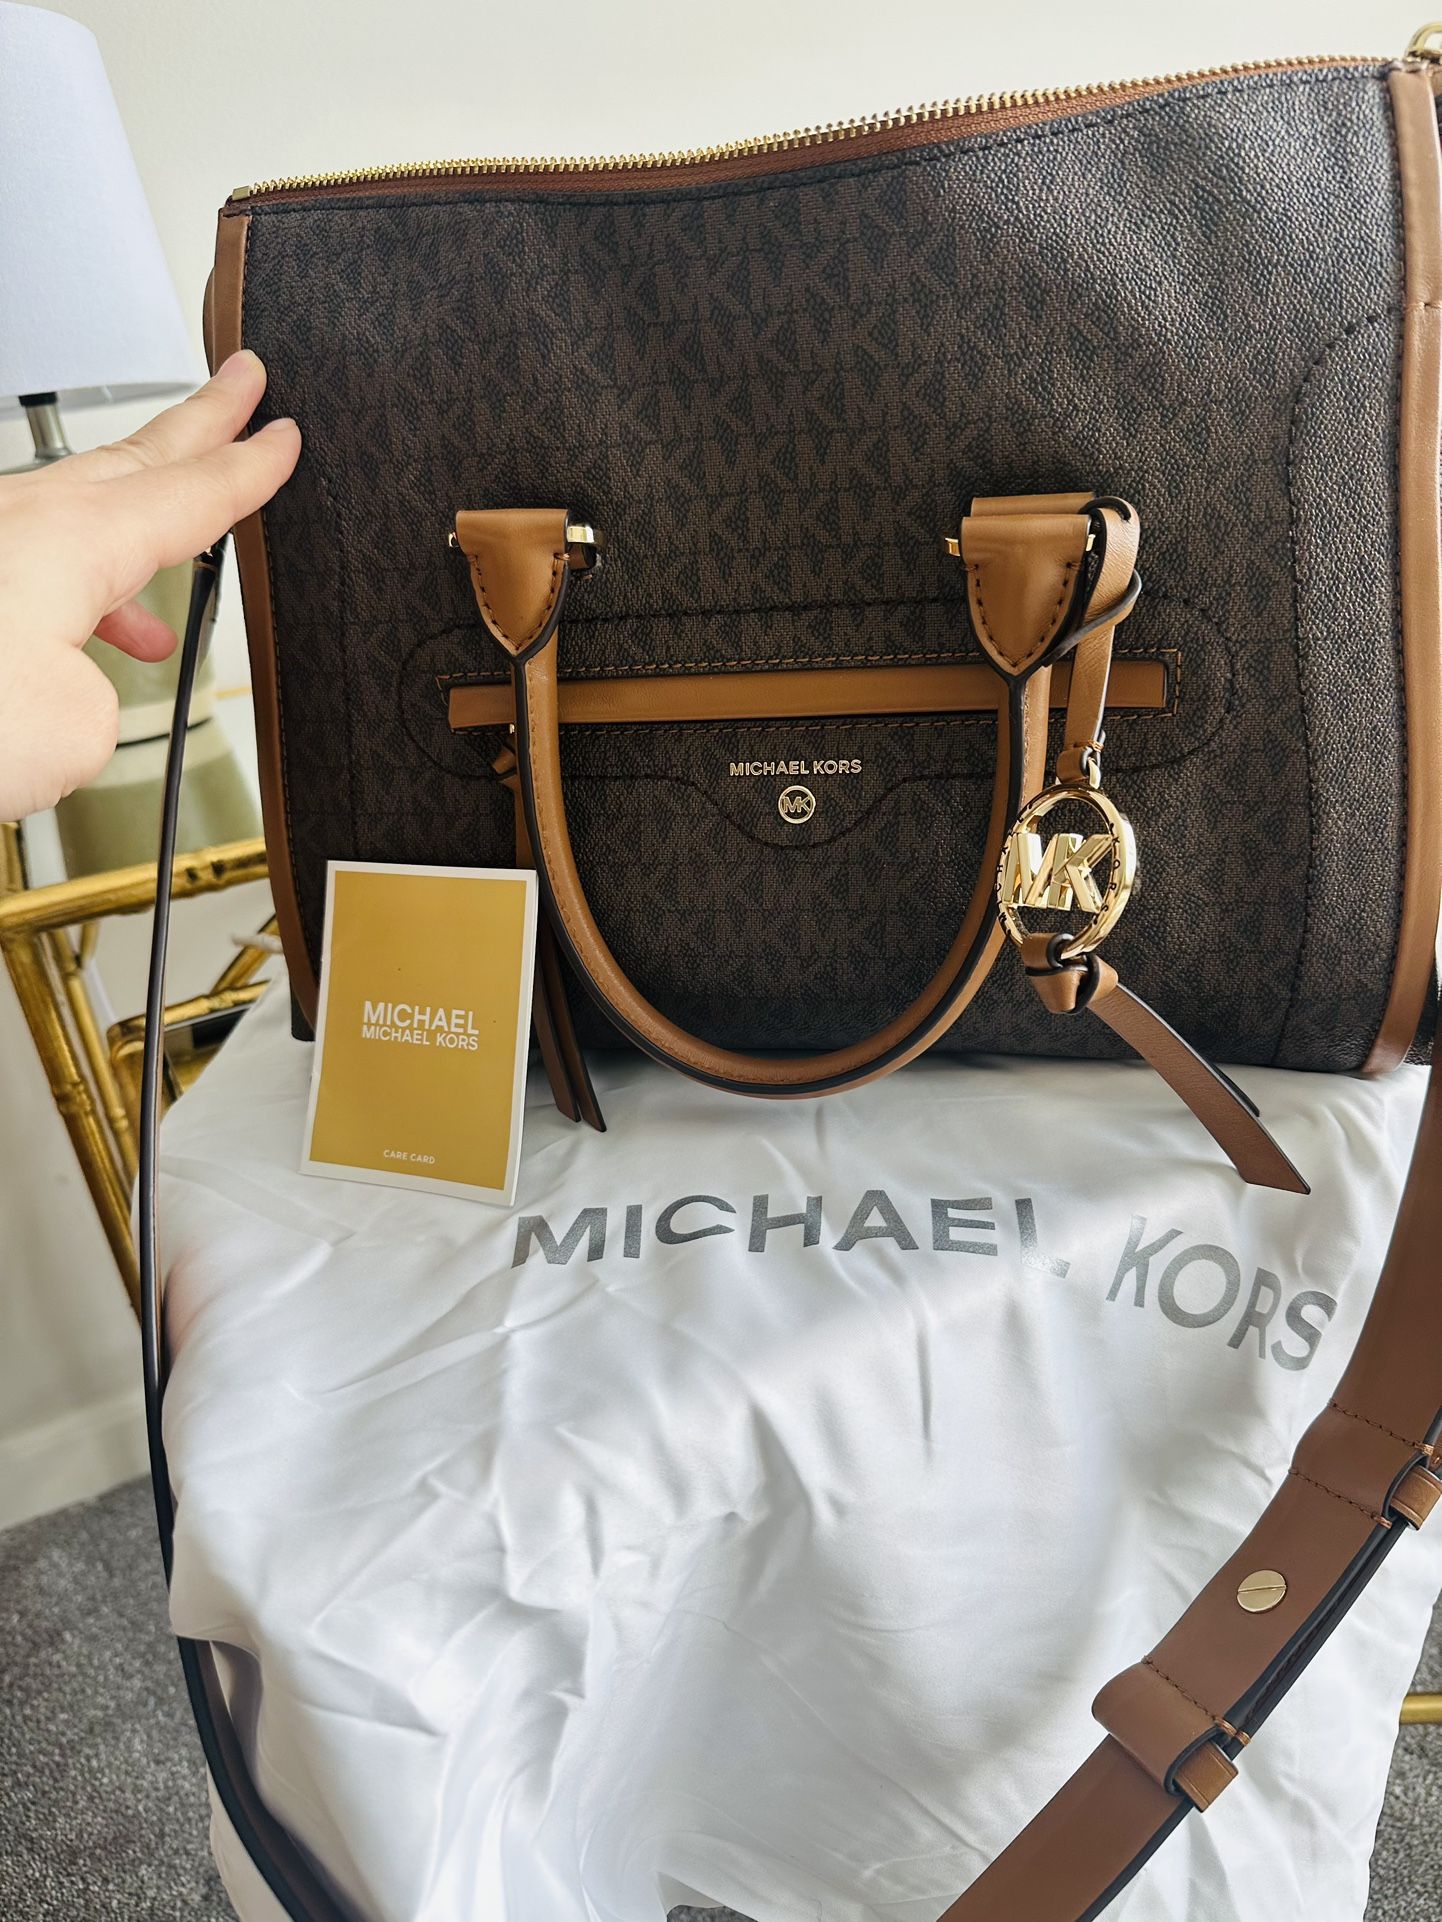 Michael Kors Bag Come Switch Dust Bag Brand New for Sale in Bolingbrook, IL  - OfferUp